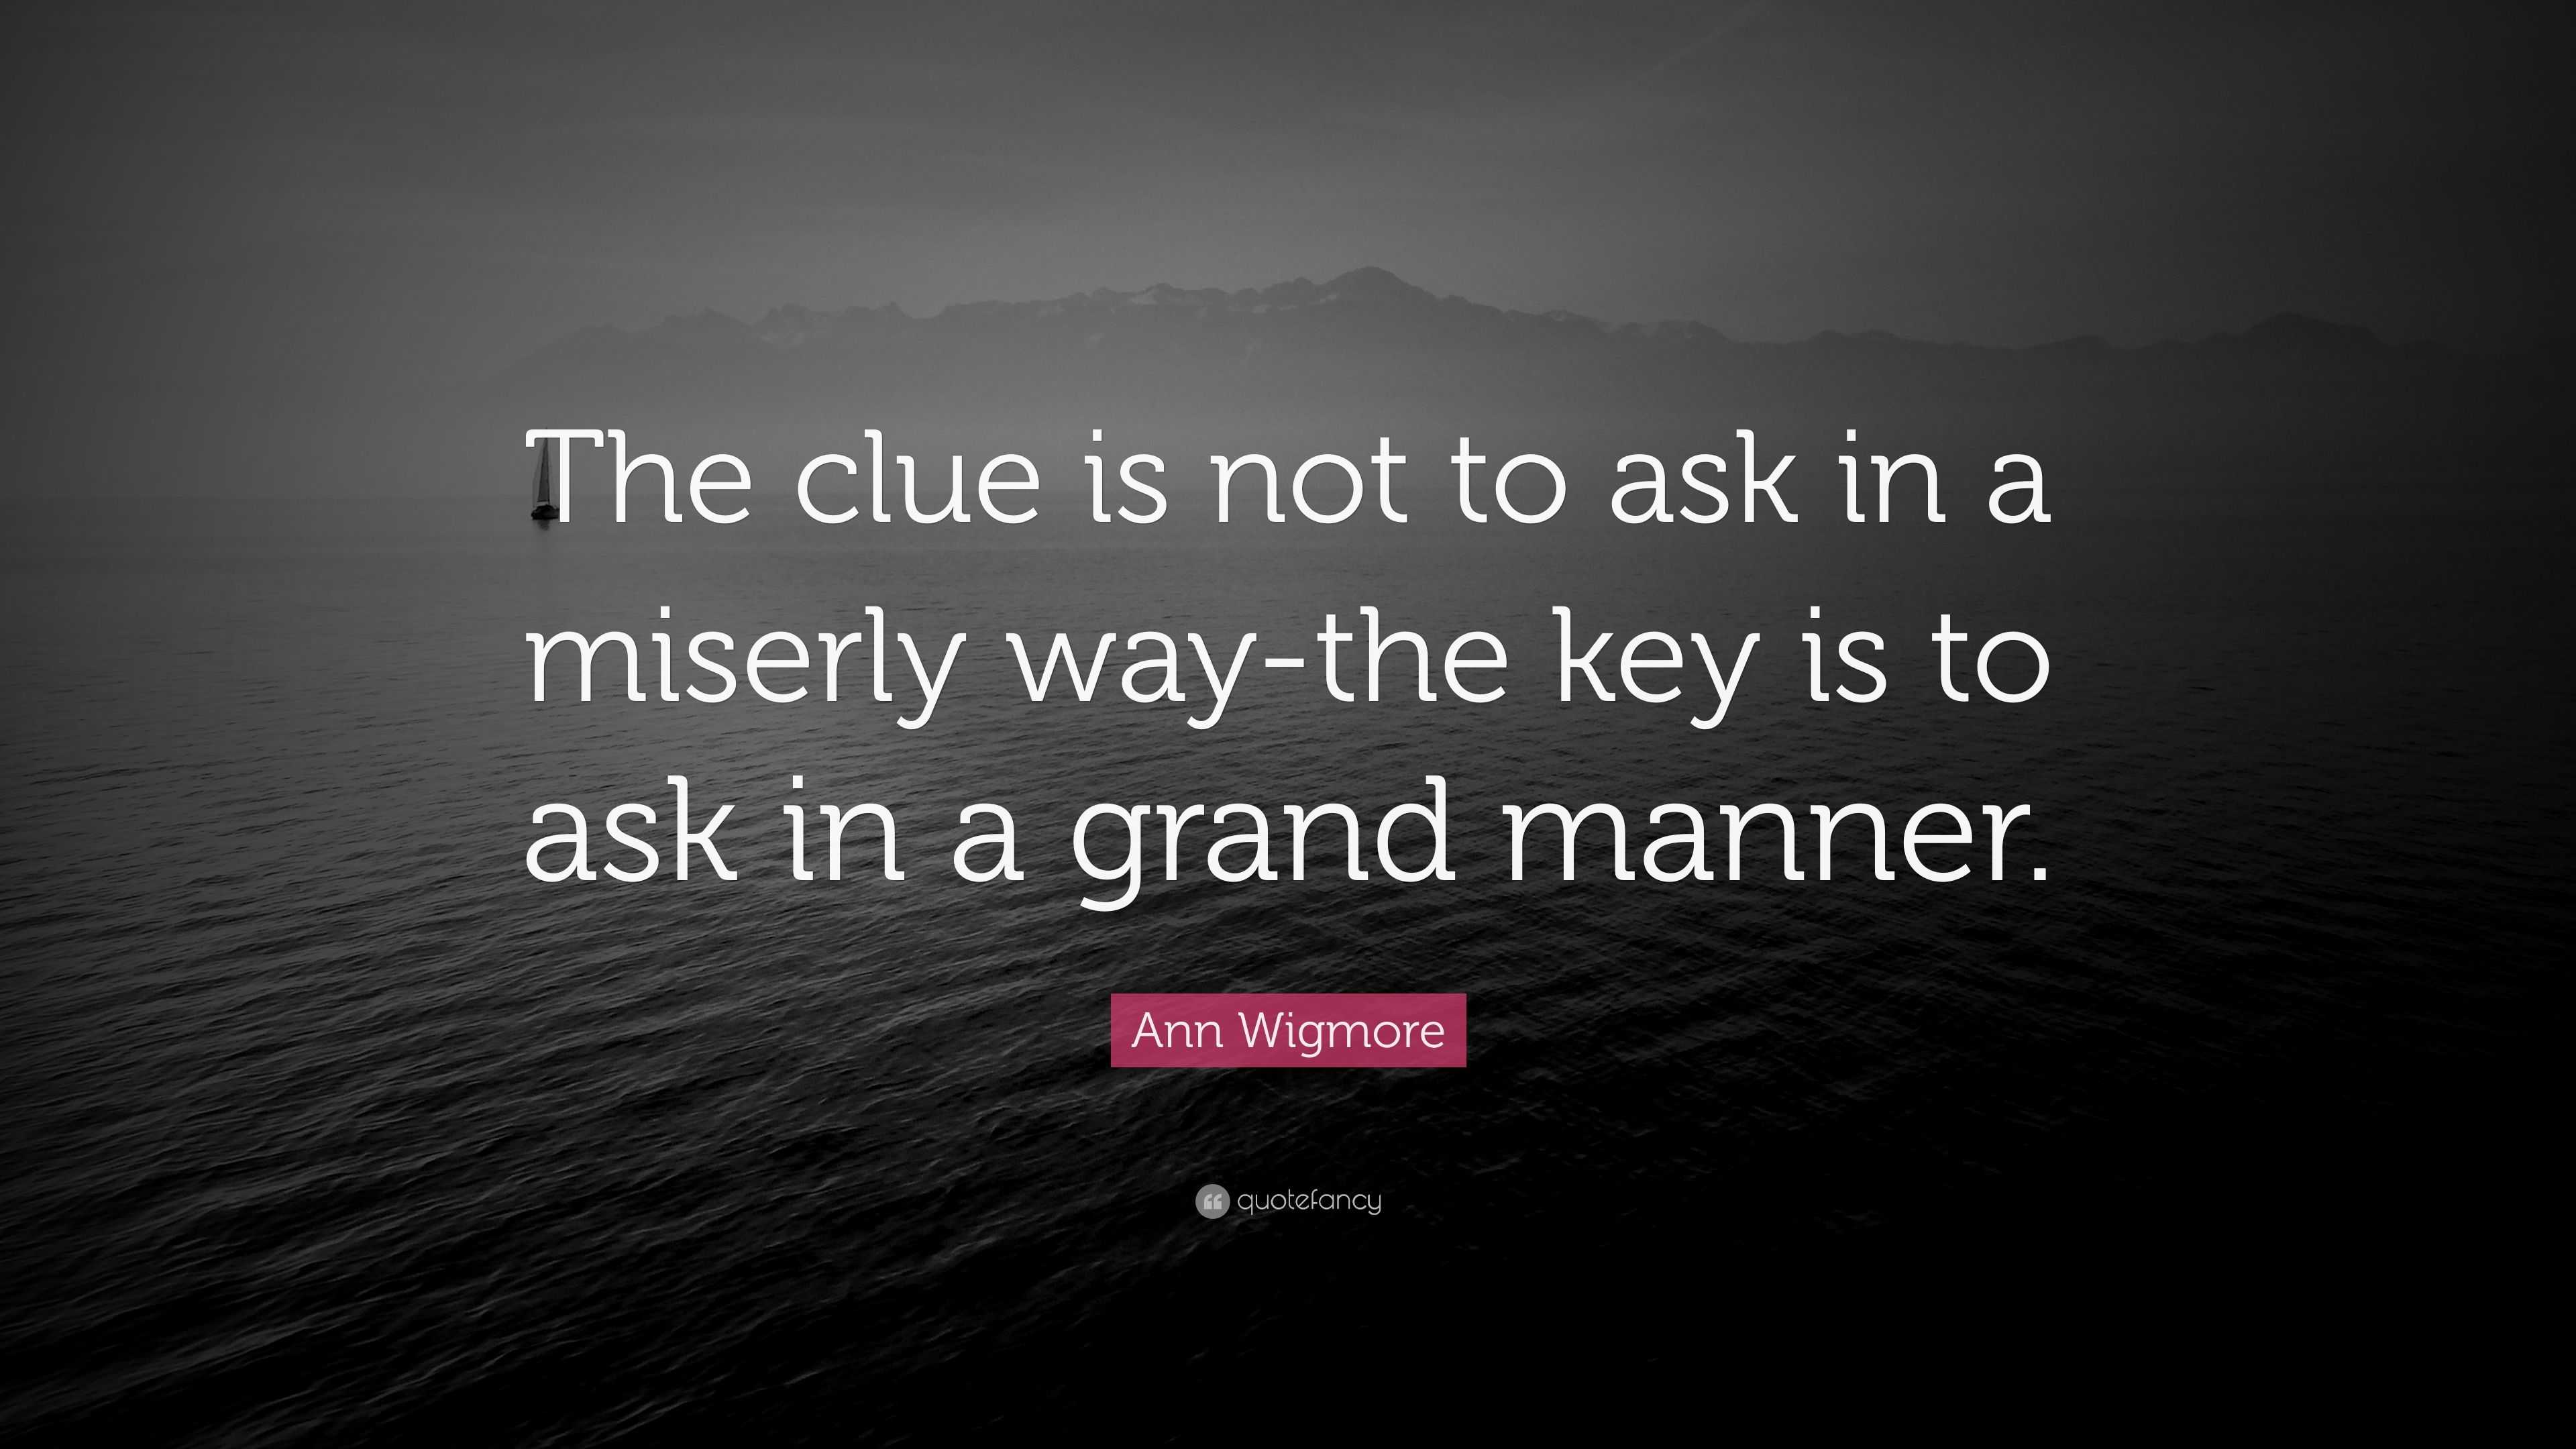 Ann Wigmore Quote: The clue is not to ask in a miserly way the key is